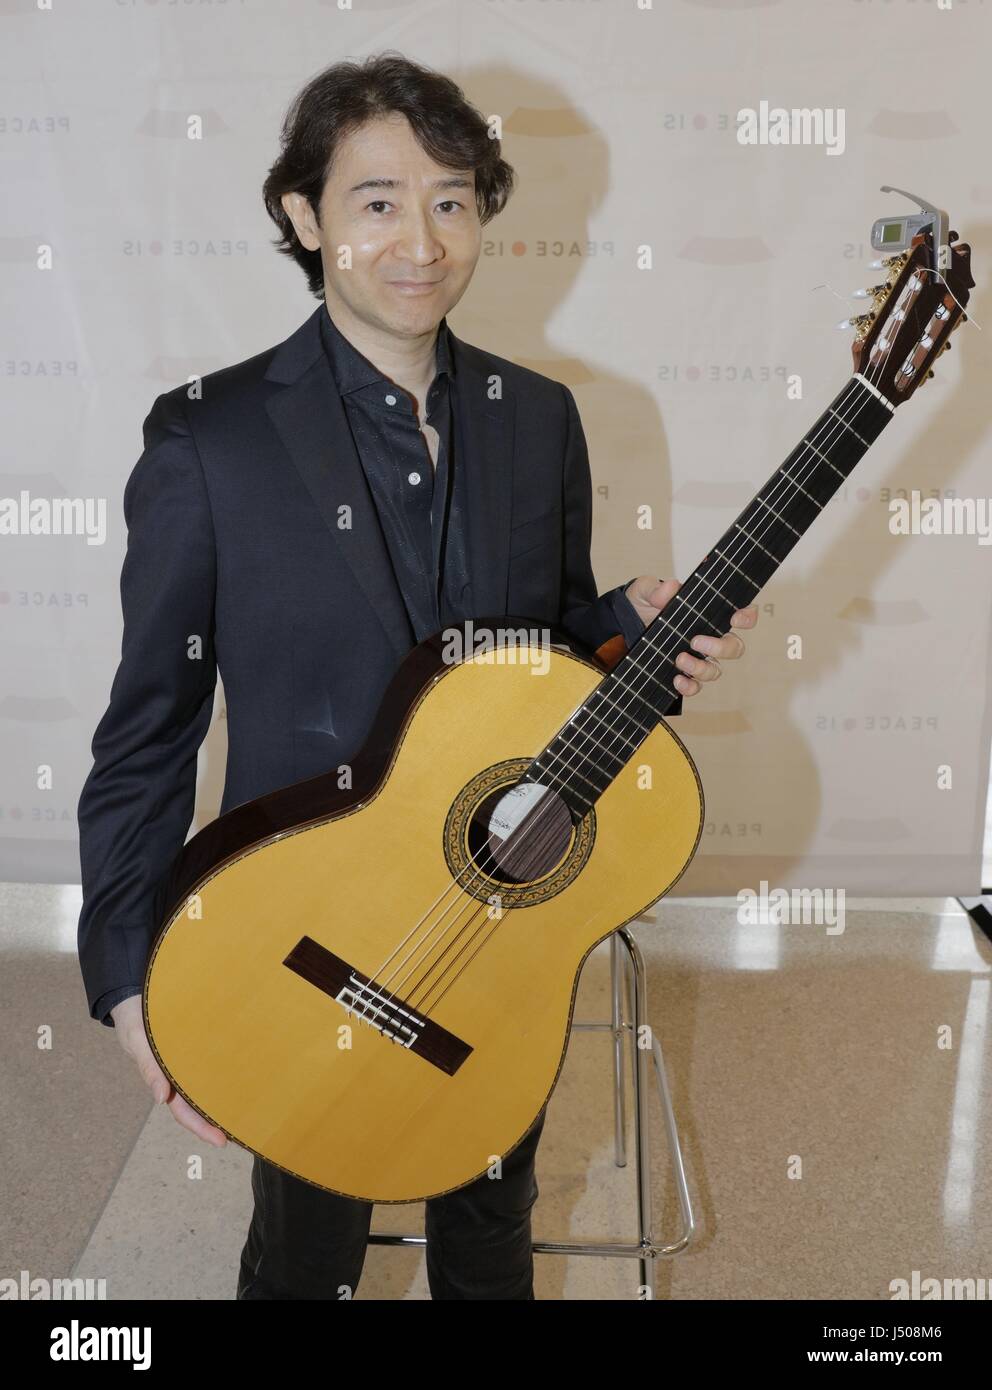 United Nations, New York, USA, May 12 2017 - PEACE IS a Concert by Shiro Otake honoring Argentina guitar player Atahualpa Yupanqui today at the UN Headquarters in New York. Photo: Luiz Rampelotto/EuropaNewswire | Verwendung weltweit/picture alliance Stock Photo